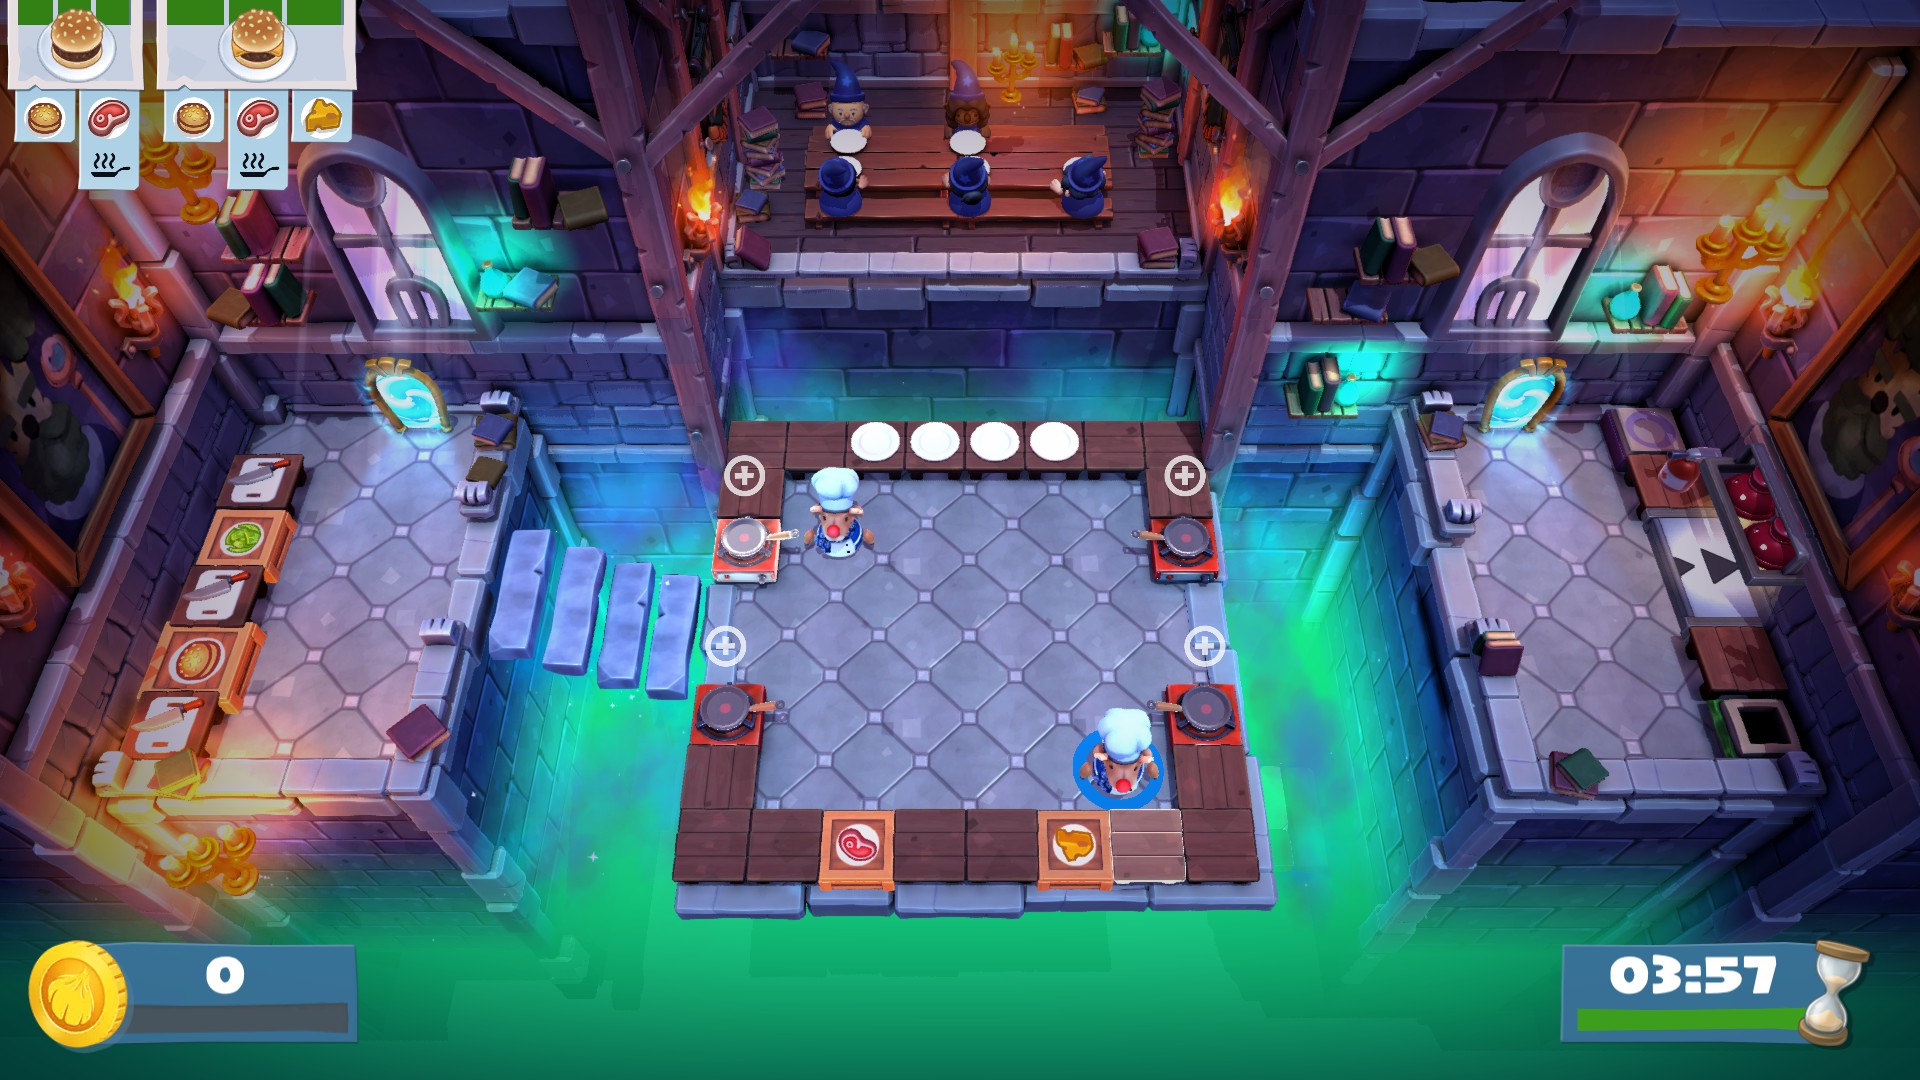 Screenshot of gameplay of Overcooked 2. [Image is taken from [Wikimedia Commons](https://en.wikipedia.org/wiki/File:Overcooked_2_screenshot.jpg), a freely licensed media file repository.]